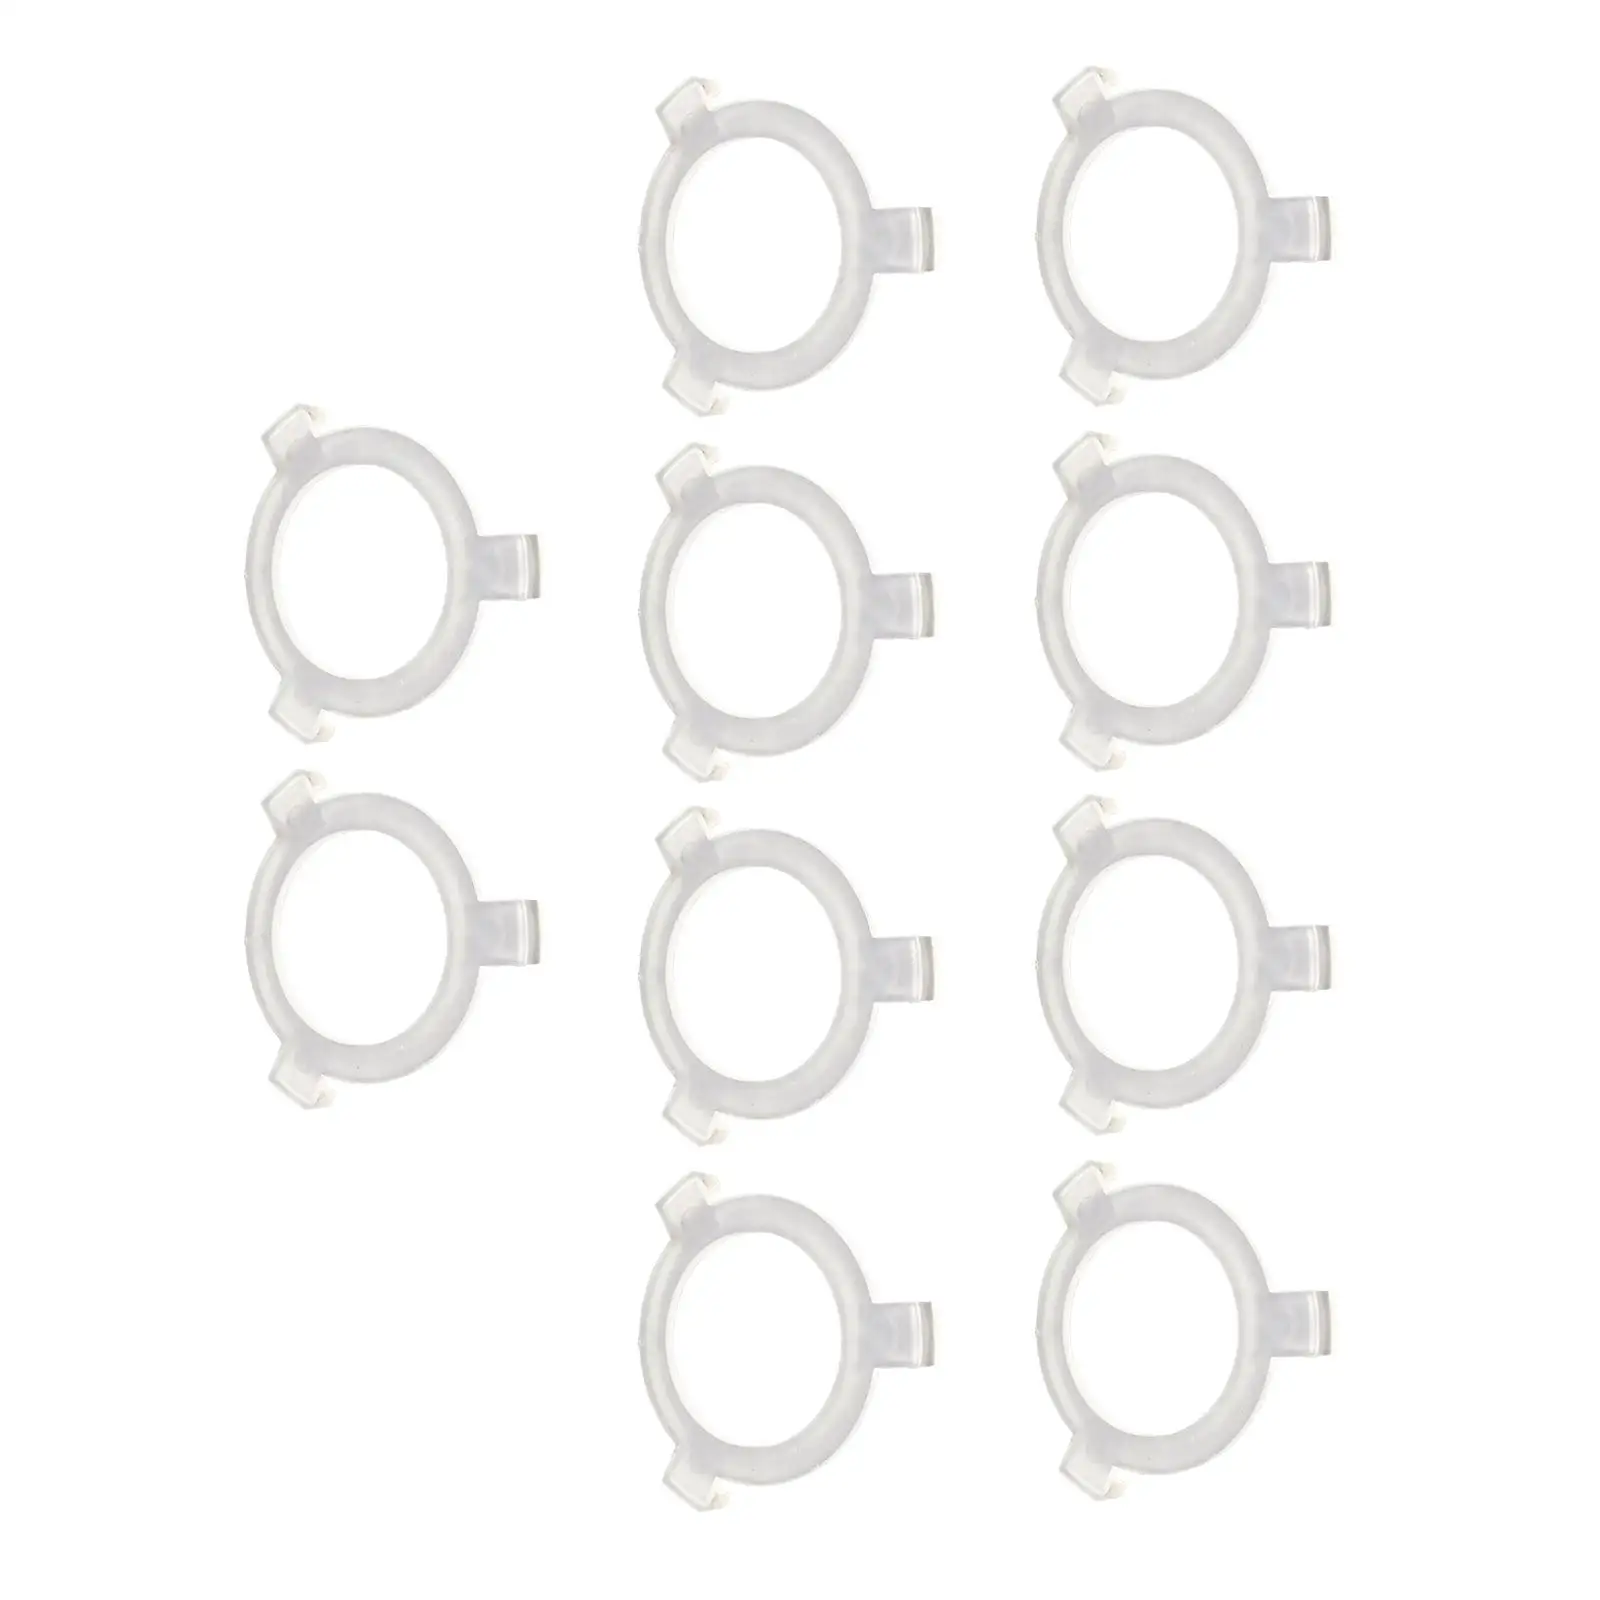 10 Pieces E27 to E26 Light Holder Converter Lampshade Adapter Washer Lighting Accessory